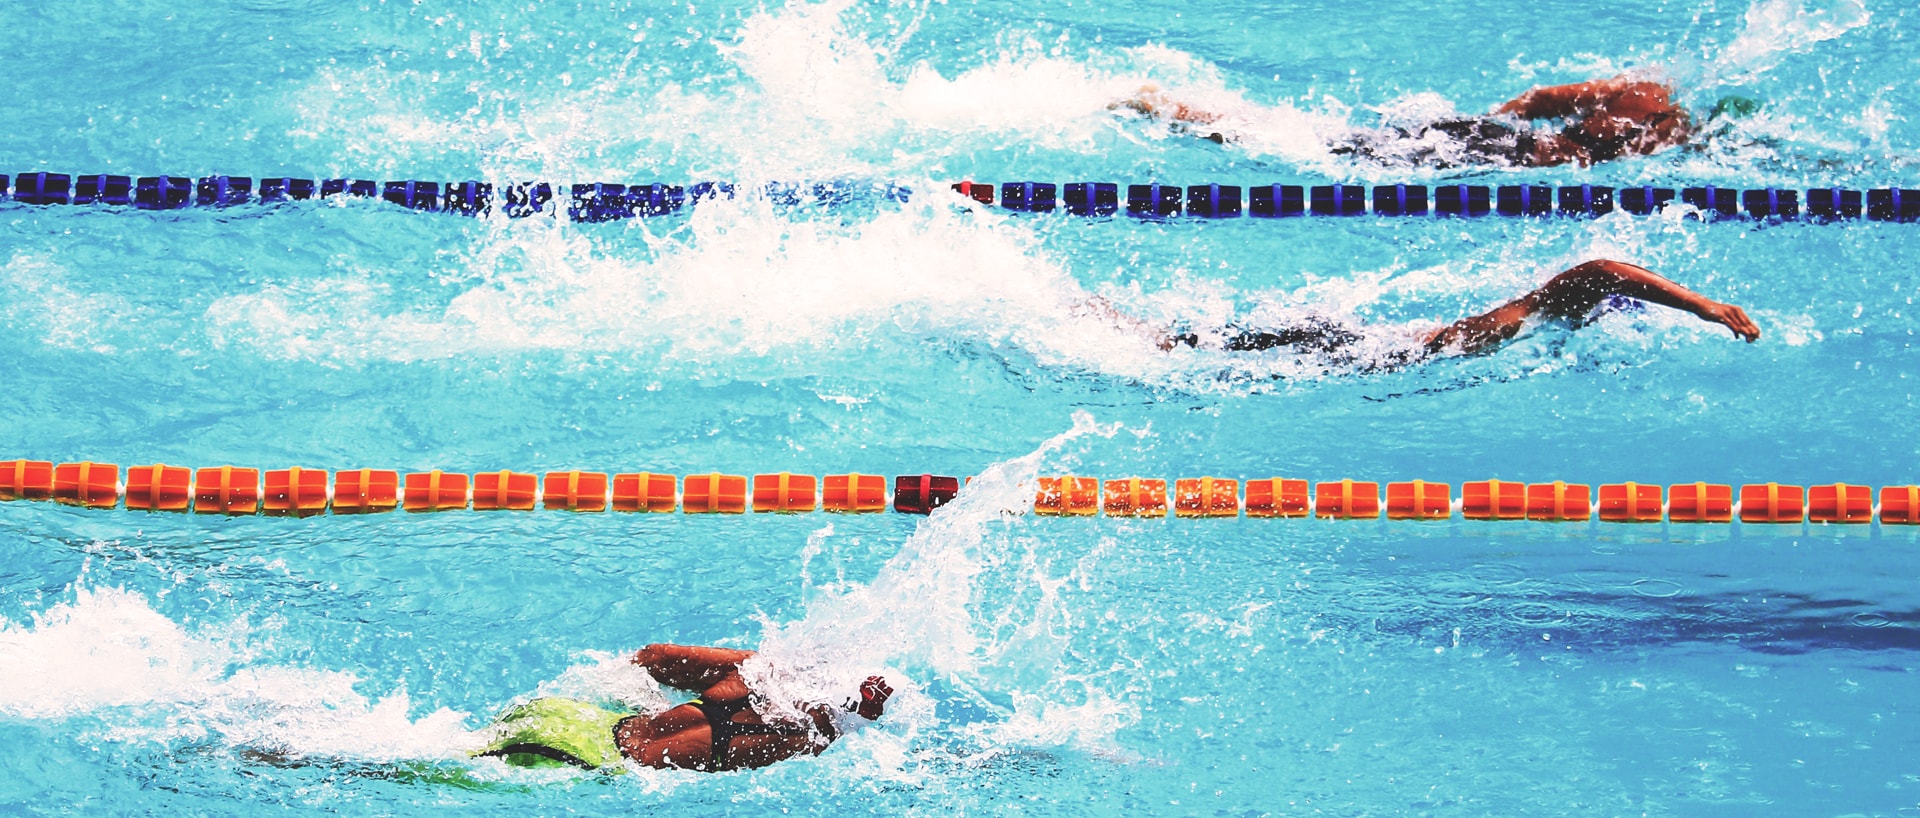 Swimmers racing in Lanes